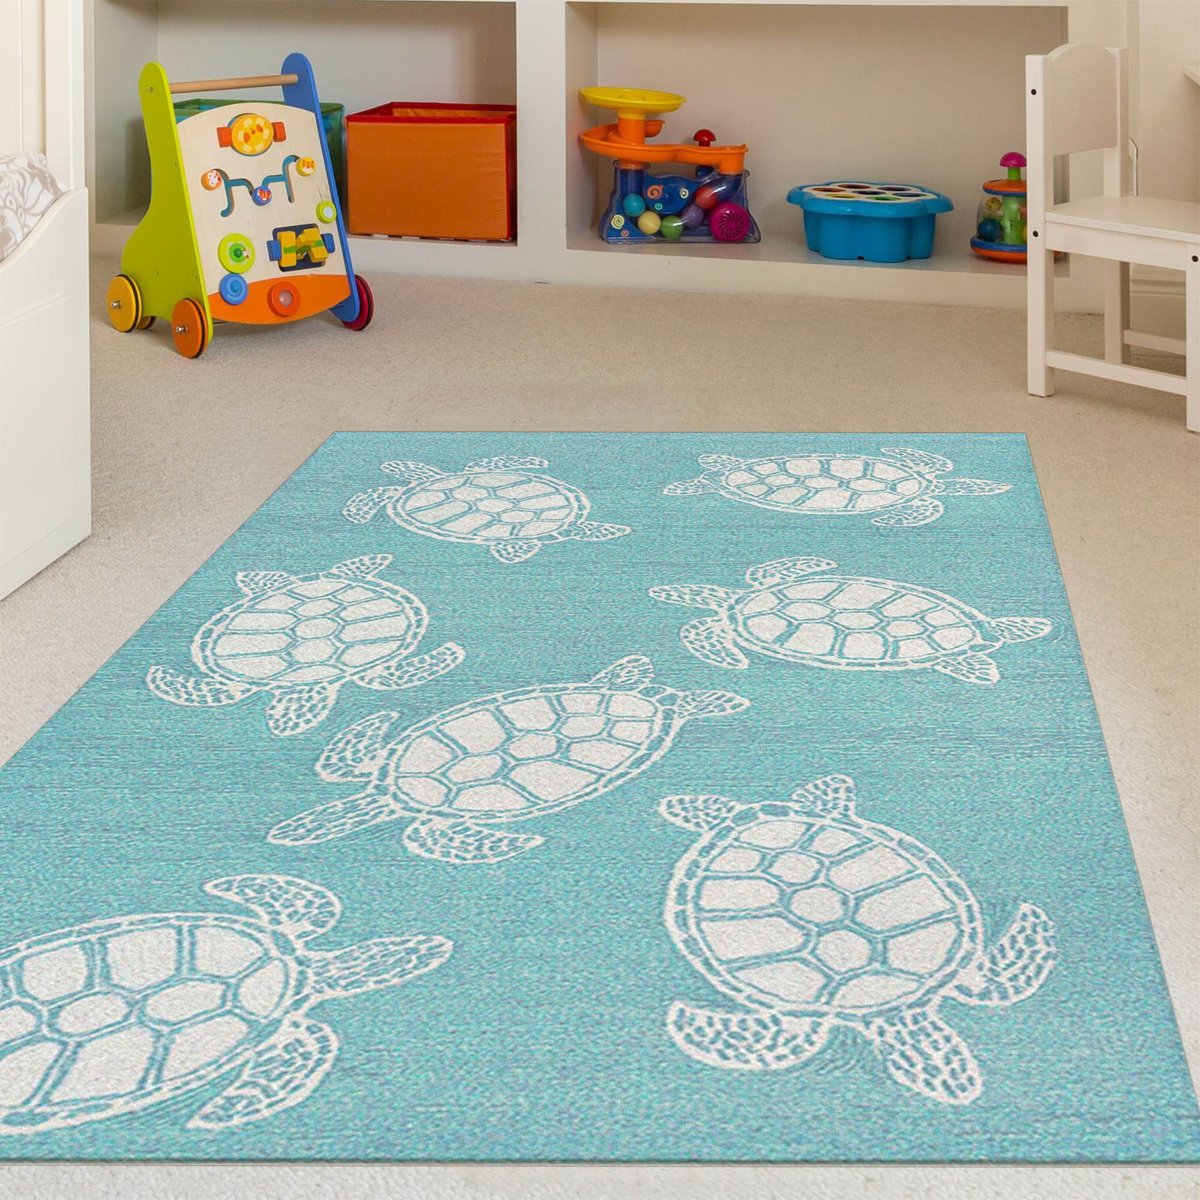 ALAZA Sea Turtle Swimming Shag Collection Non-Slip Area Rug Carpet Doormat for Kitchen Entryway Living Room Bedroom Sofa 1'7 x 3'3 